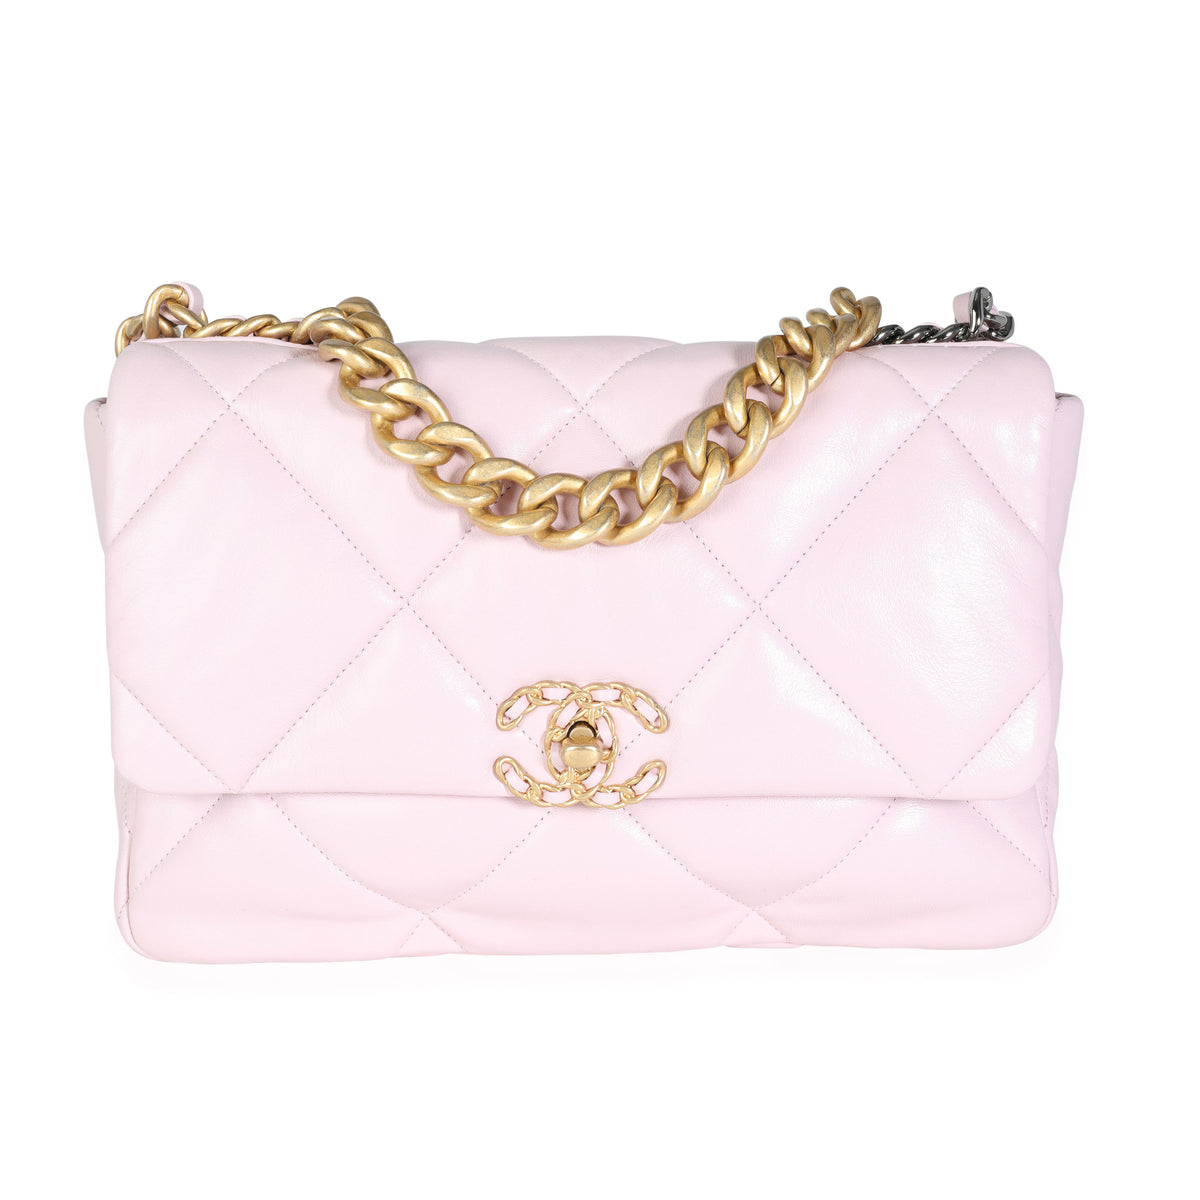 Chanel 19 Flap Bag Quilted Jersey Medium Pink 680161